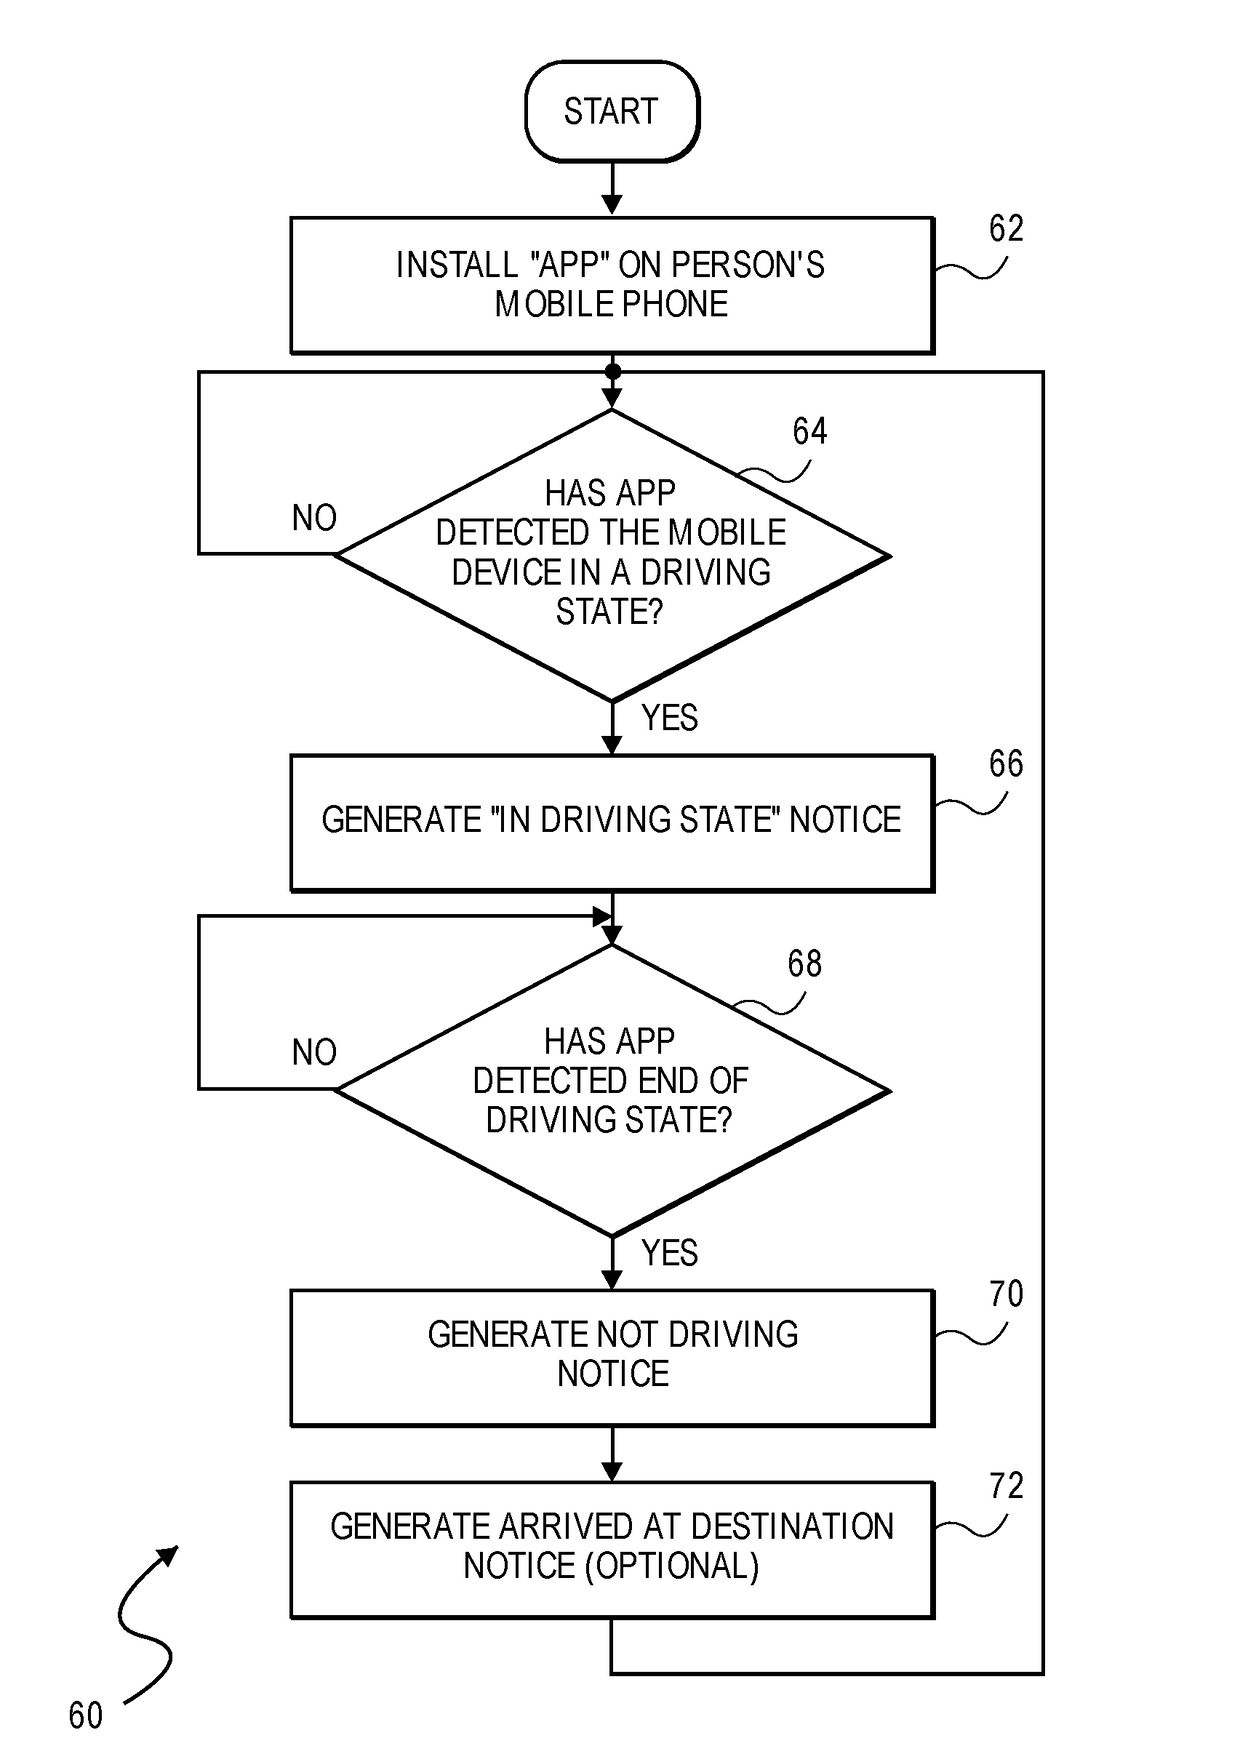 System and method for generating driver status and destination arrival push notifications for reducing distracted driving and increasing driver safety